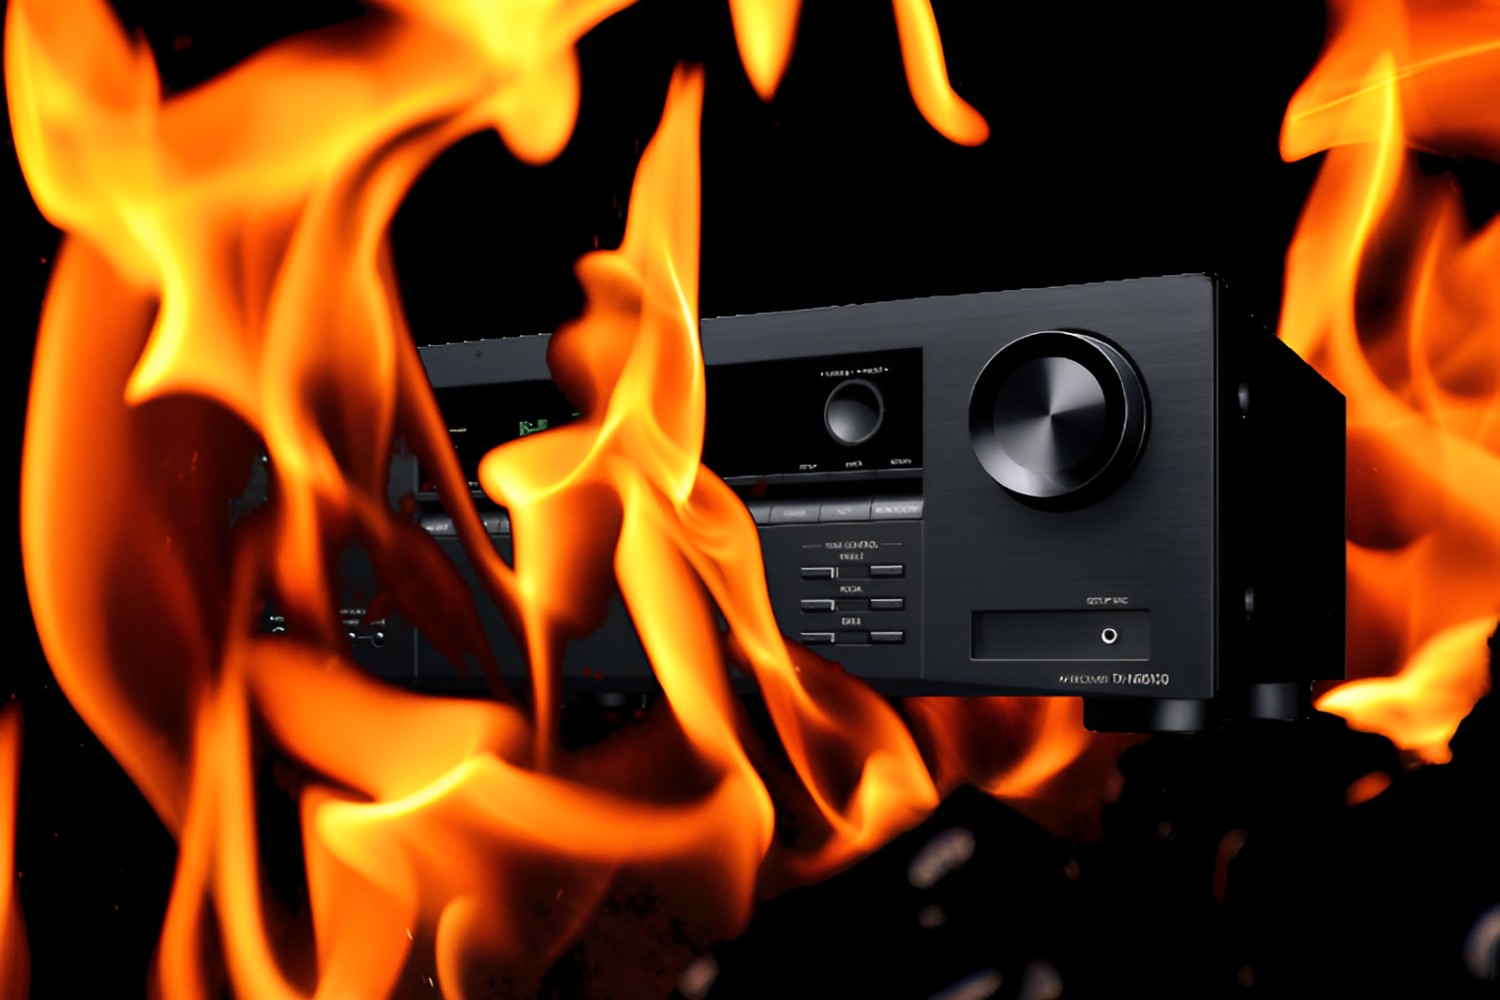 What Temperature Is Considered Too Hot For An AV Receiver